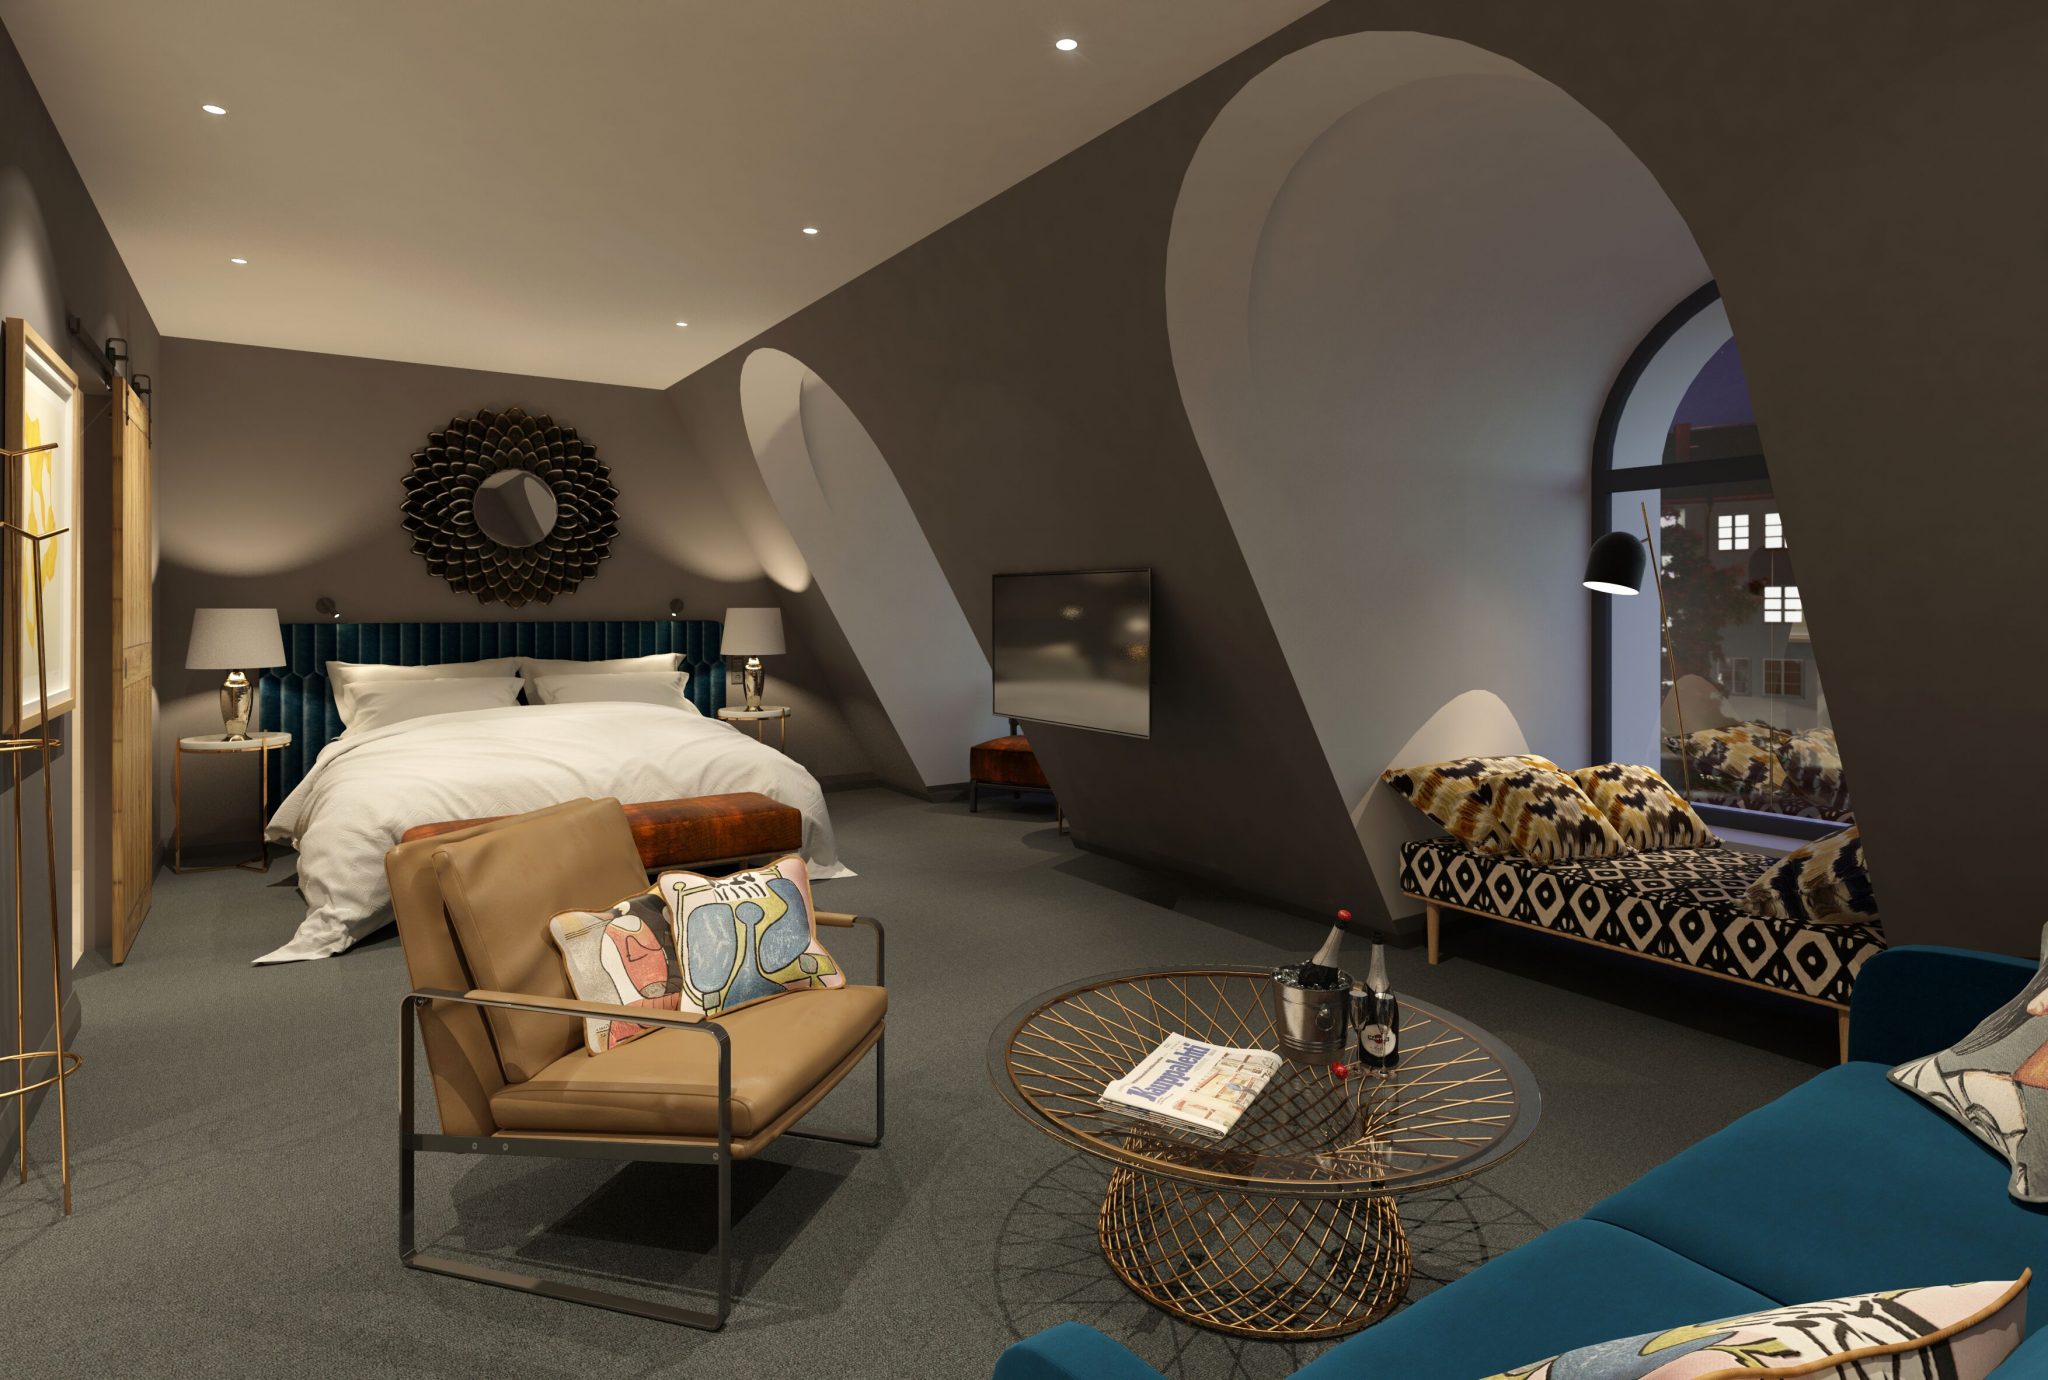 A fancy double-bed room with cozy furniture and two big arc shape windows.